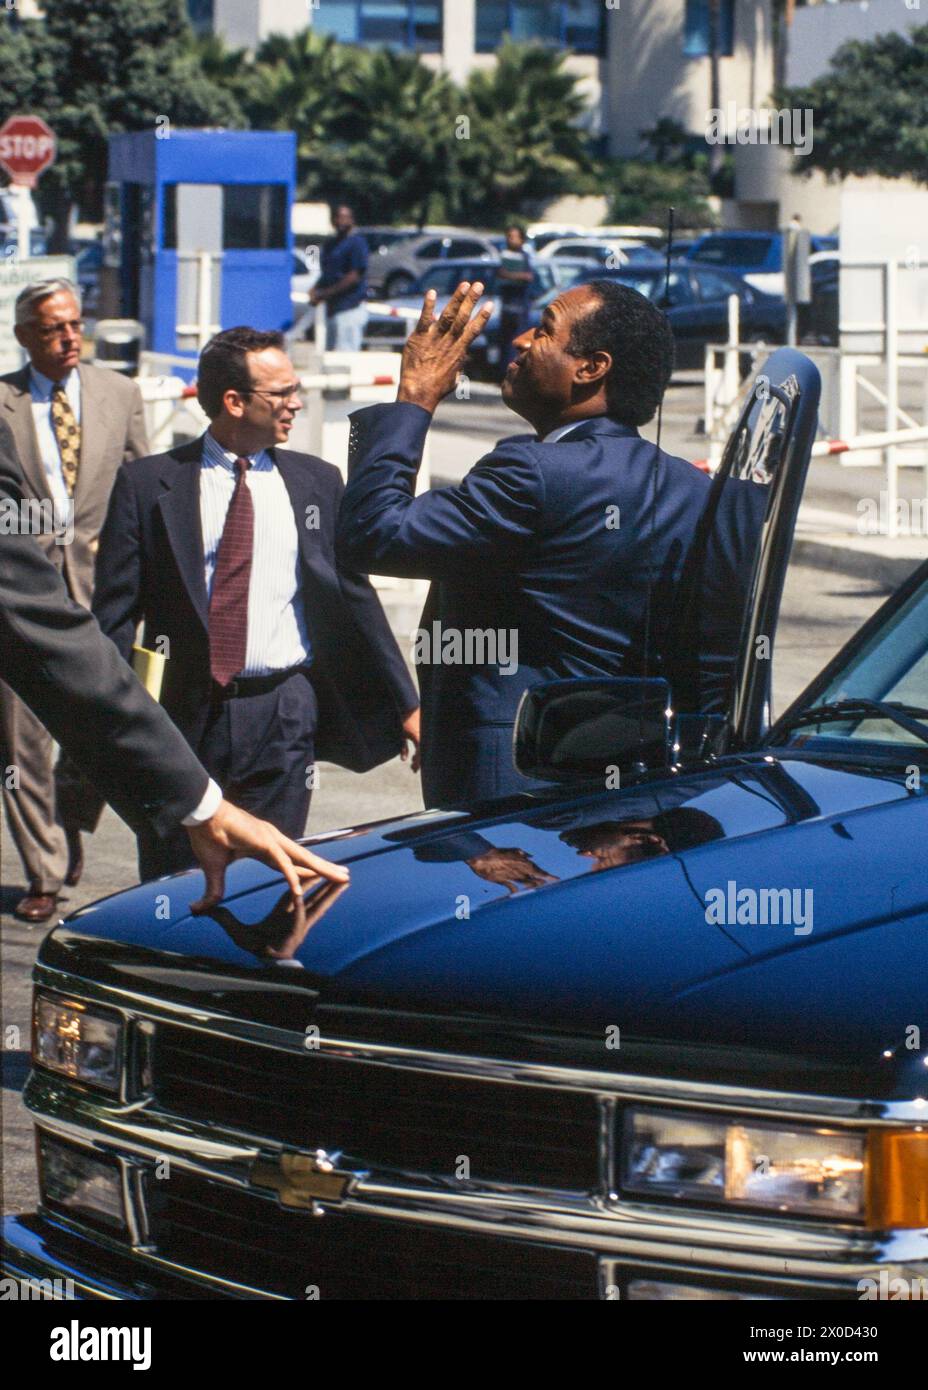 O.J. Simpson arrives the Santa Monica, California Courthouse  on September 20, 1996. Simpson arrived for his first day in court for the wrongful death Stock Photo